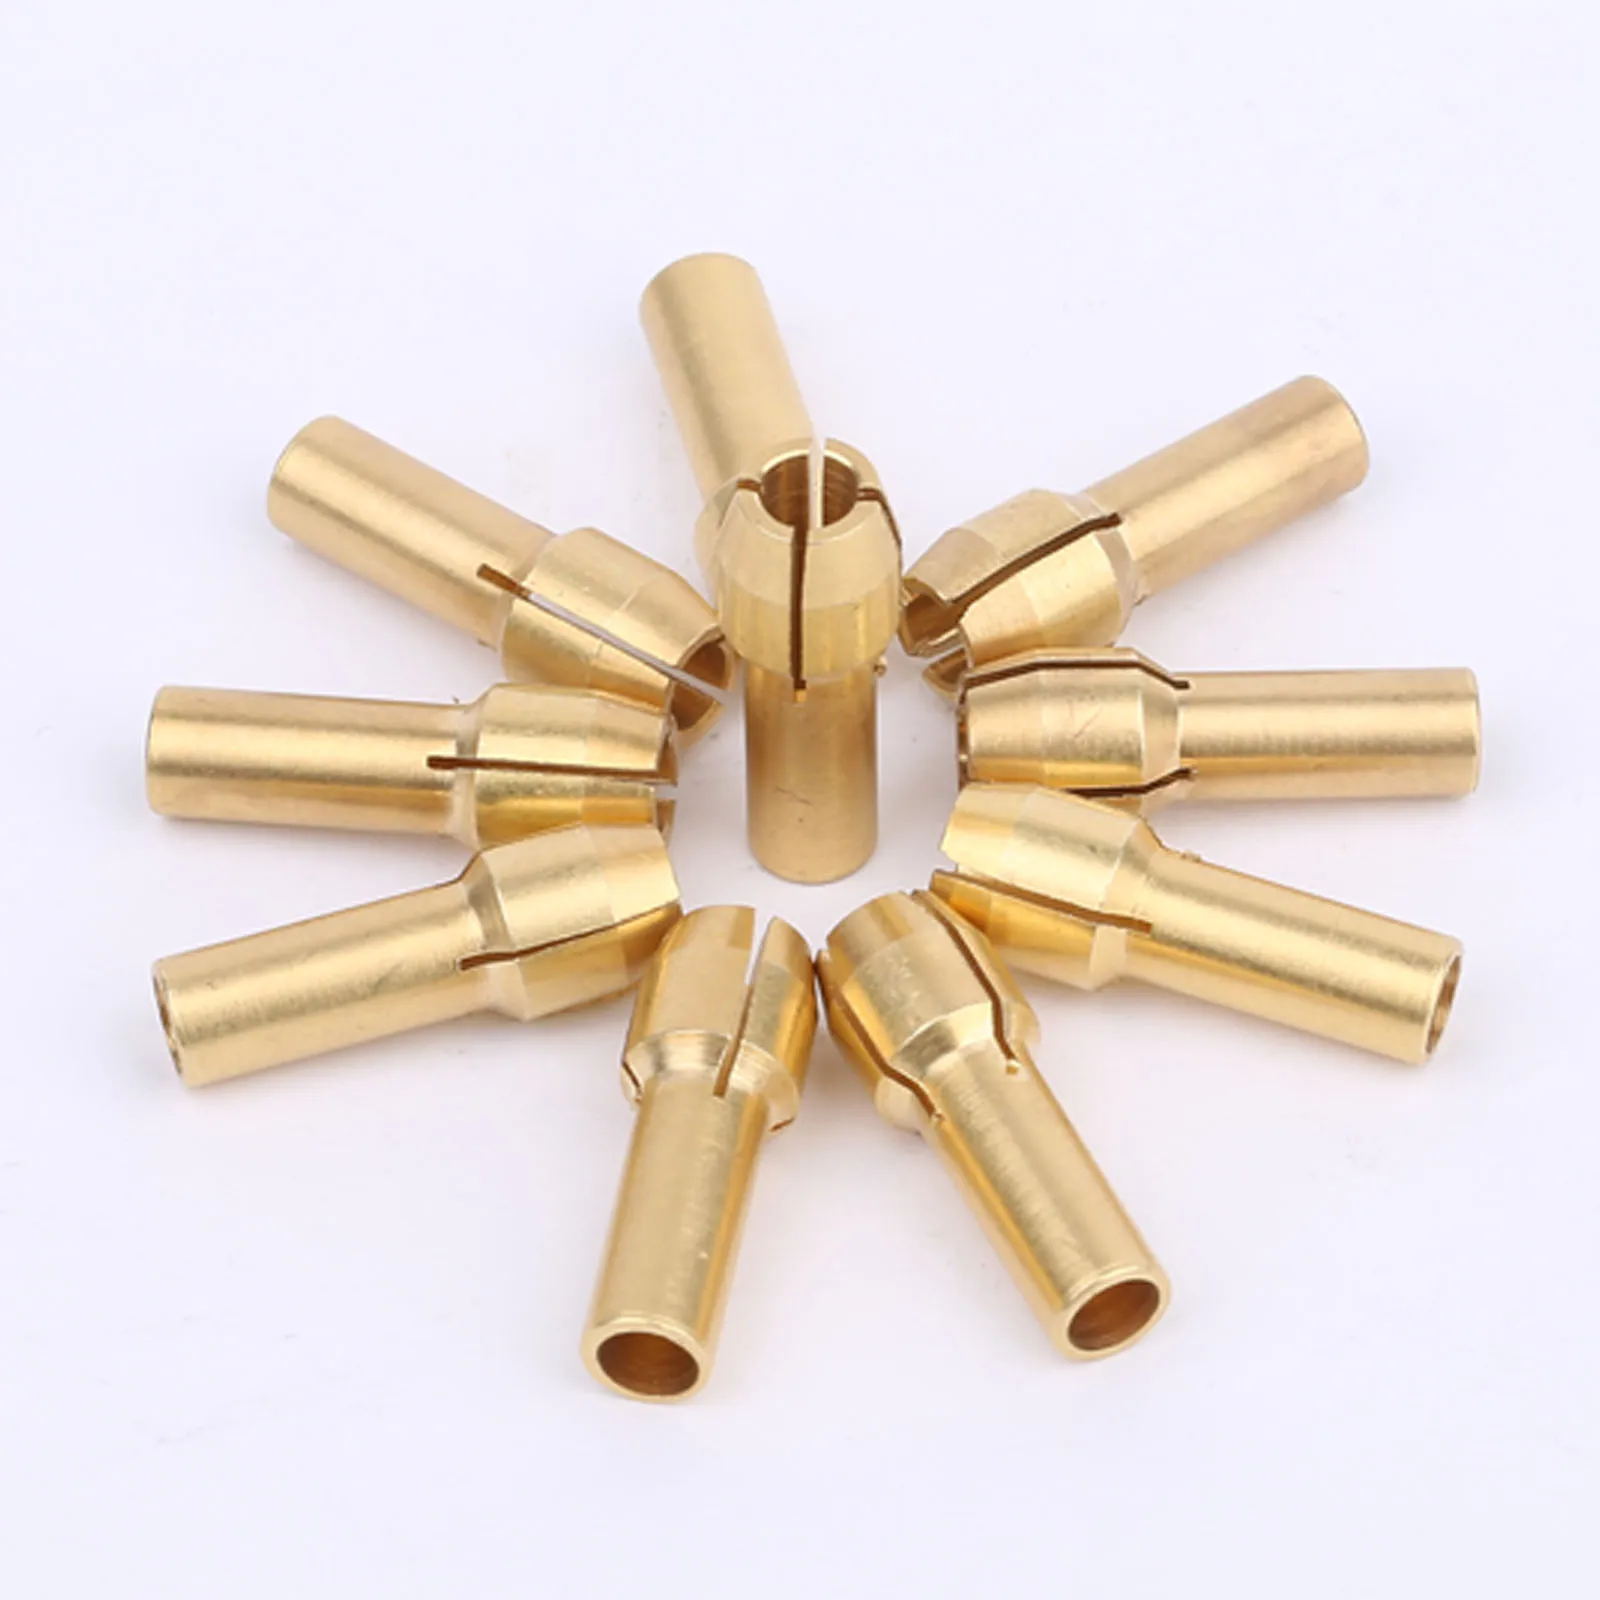 

10PCS Mini Drill Chucks Adapter for DREMEL Brass Collect 3.2mm/1/8" for Rotary Power Tool Accessorie Hold 2.9-3.2mm Shank DRELD